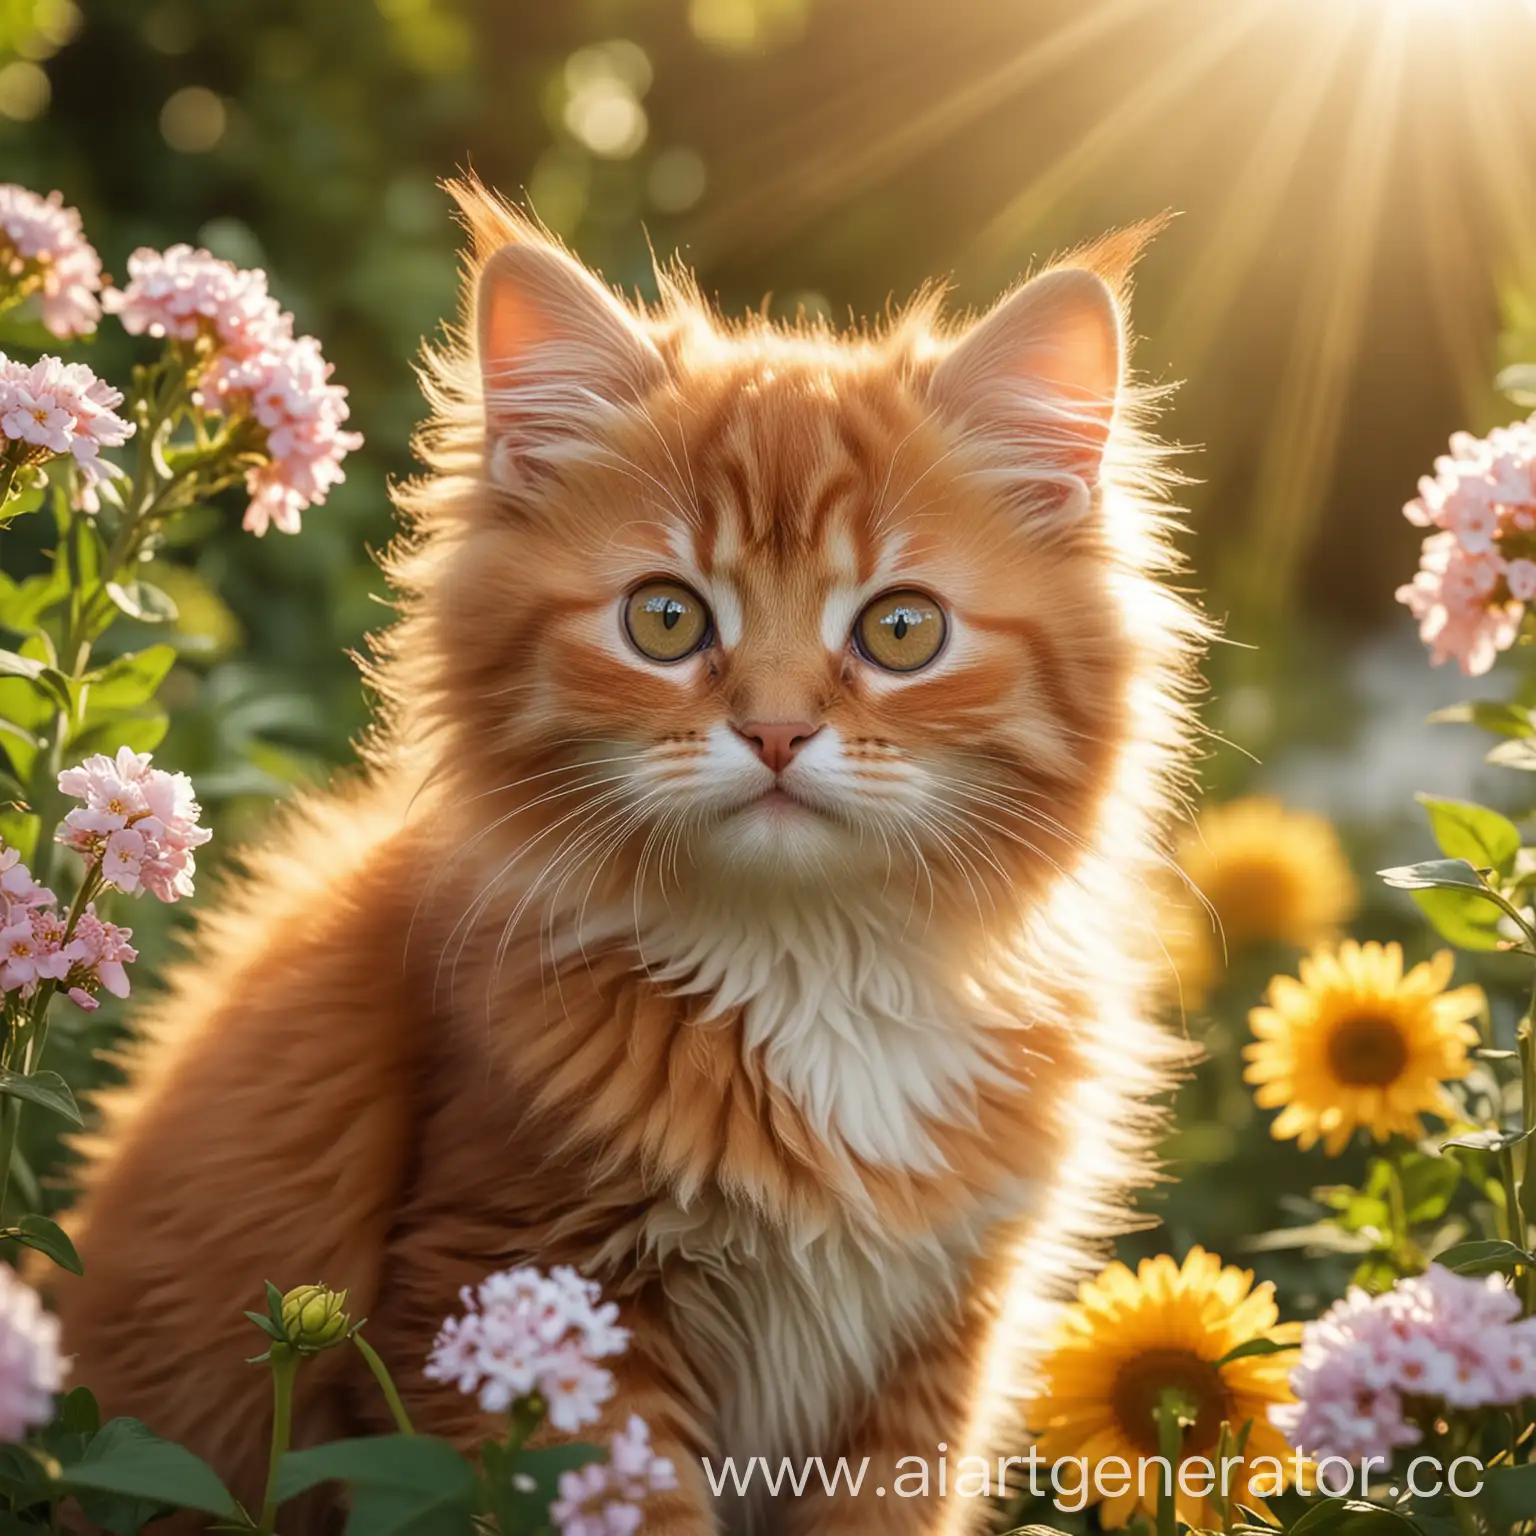 Adorable-Fluffy-Ginger-Kitten-with-Big-Eyes-Surrounded-by-Flowers-and-Sun-Rays